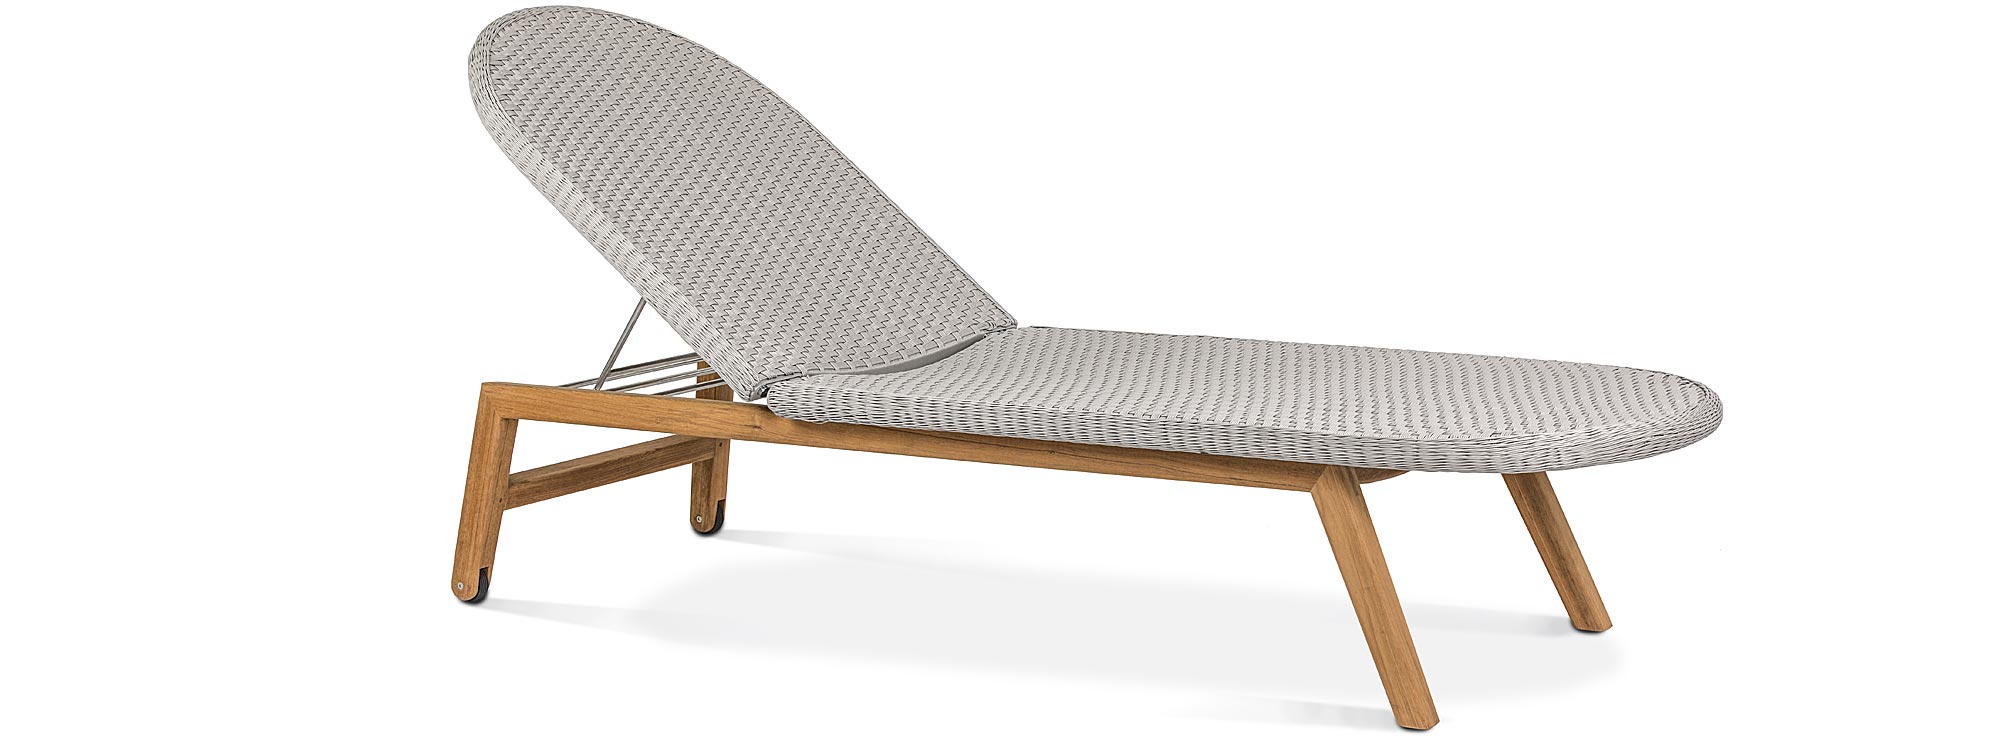 Studio image of FueraDentro Shell retro sun lounger with taupe batyline fibre seat and back and teak legs